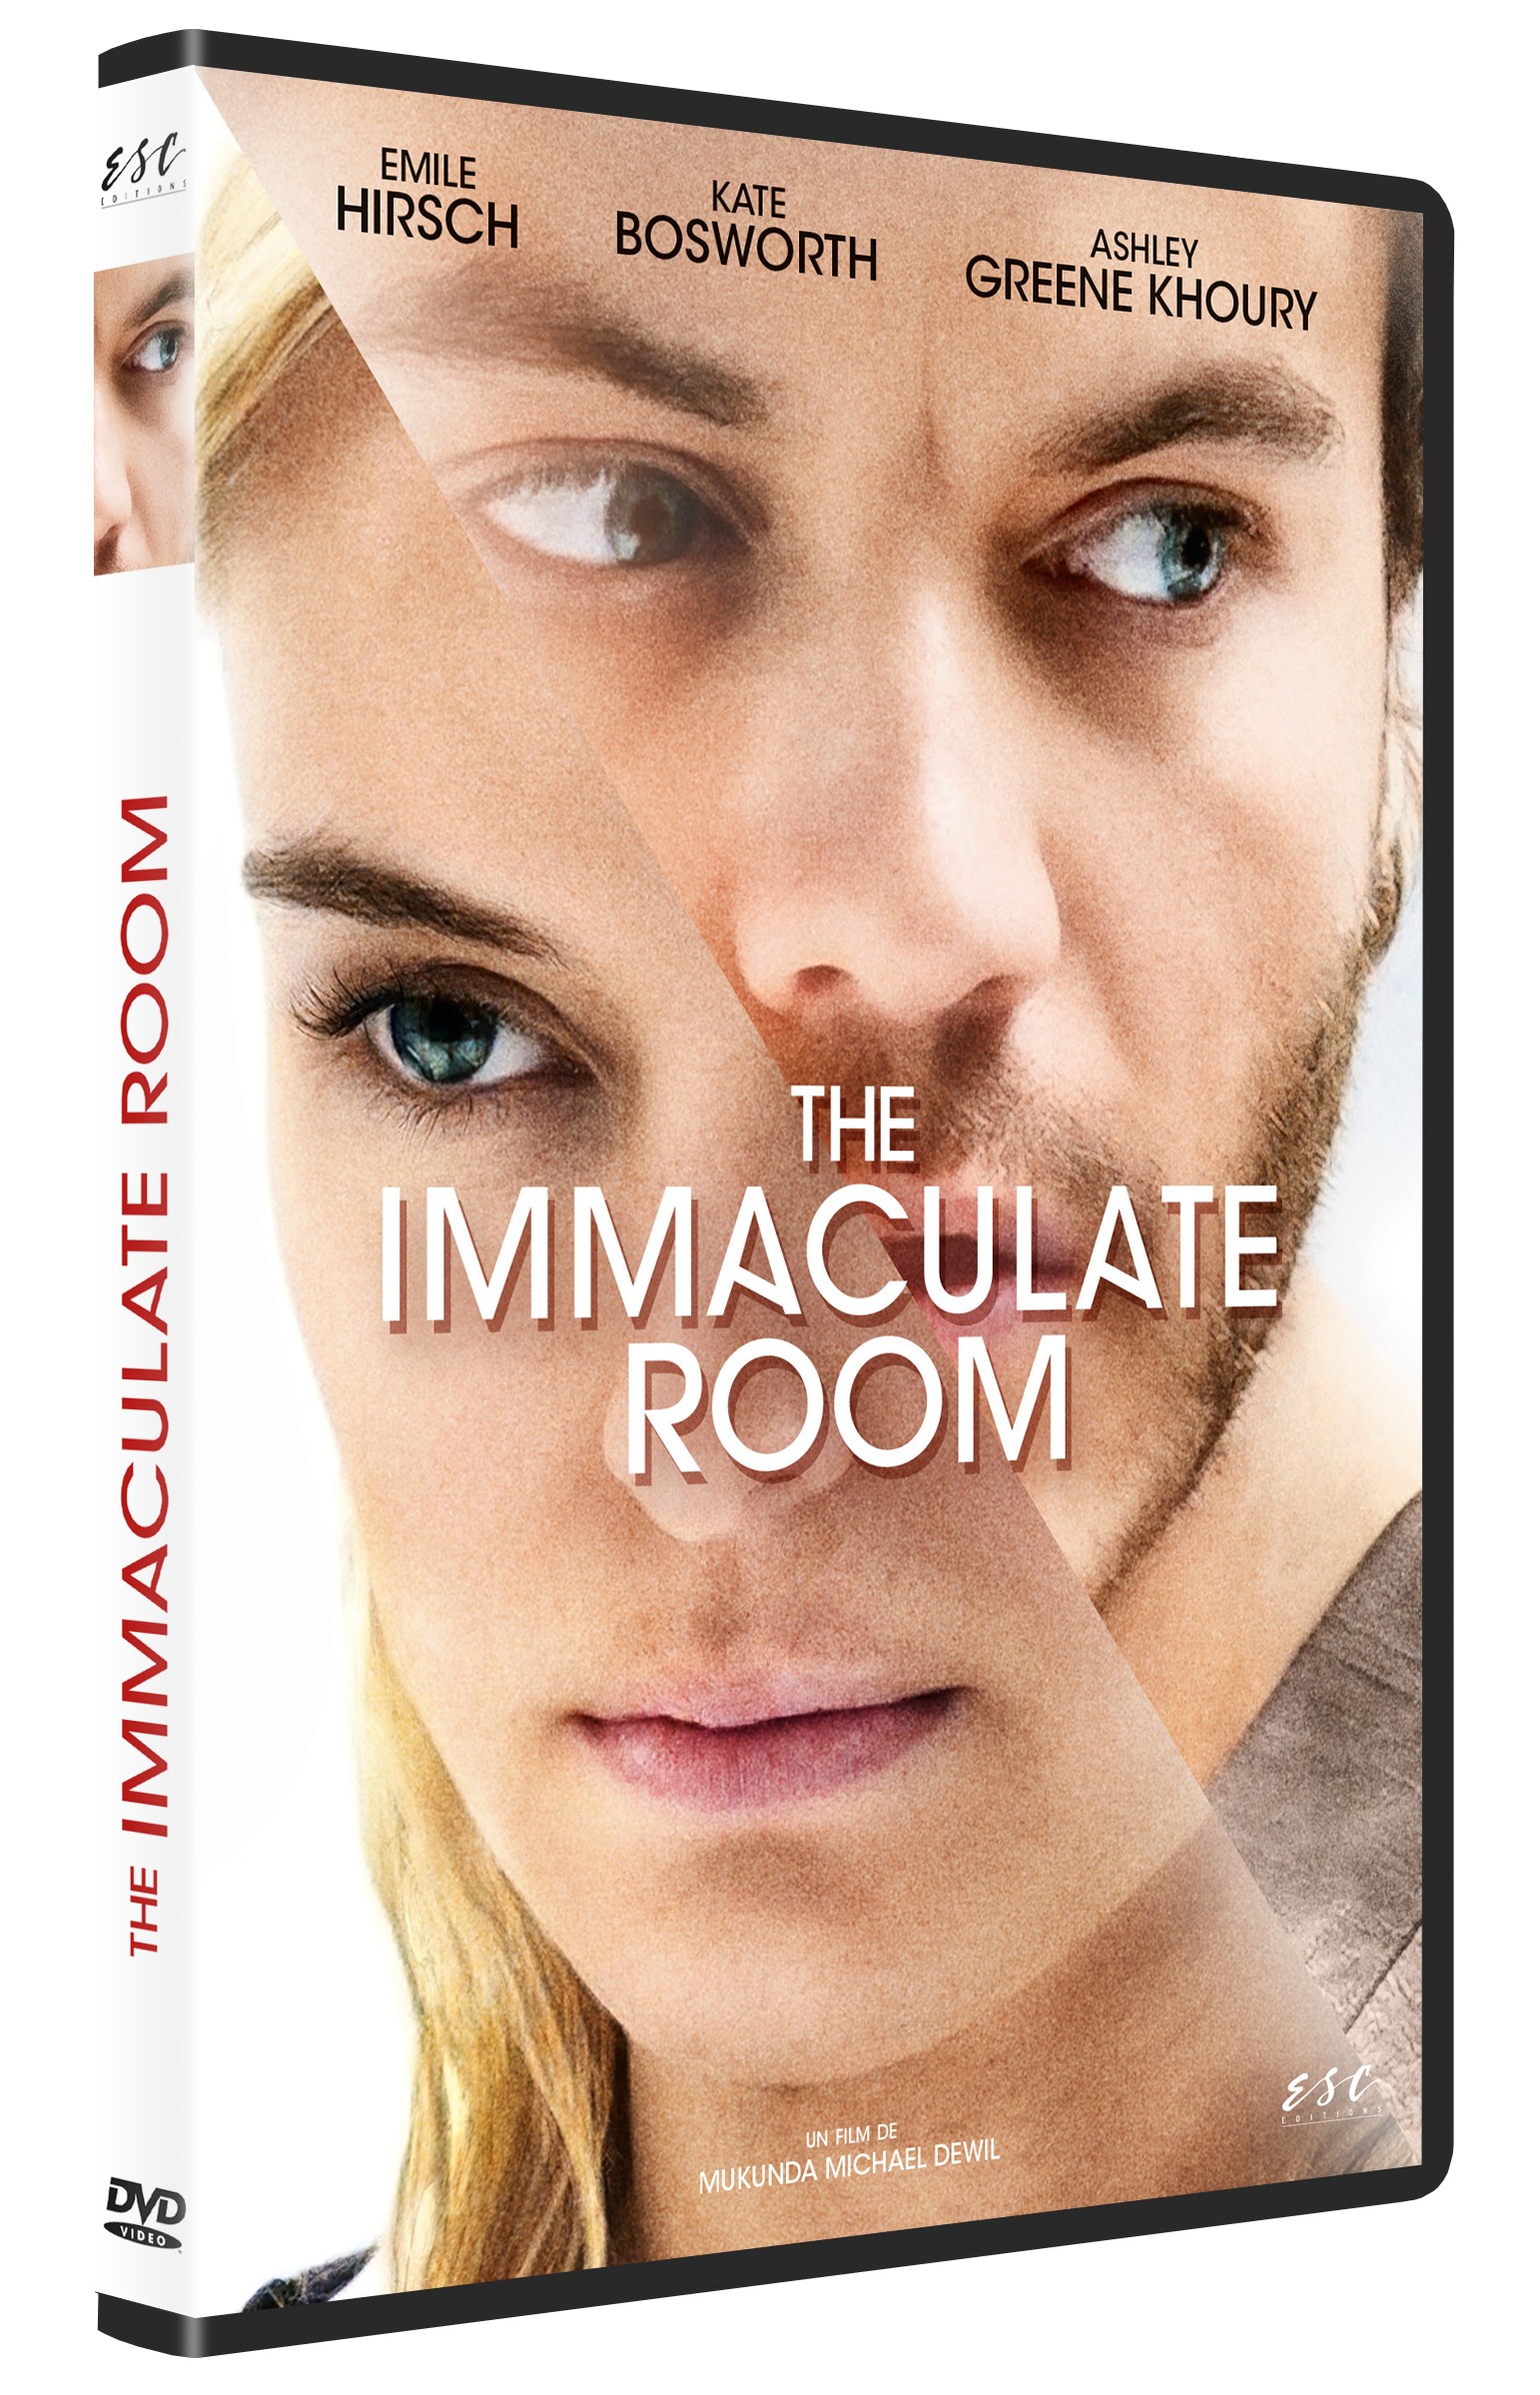 THE IMMACULATE ROOM - DVD